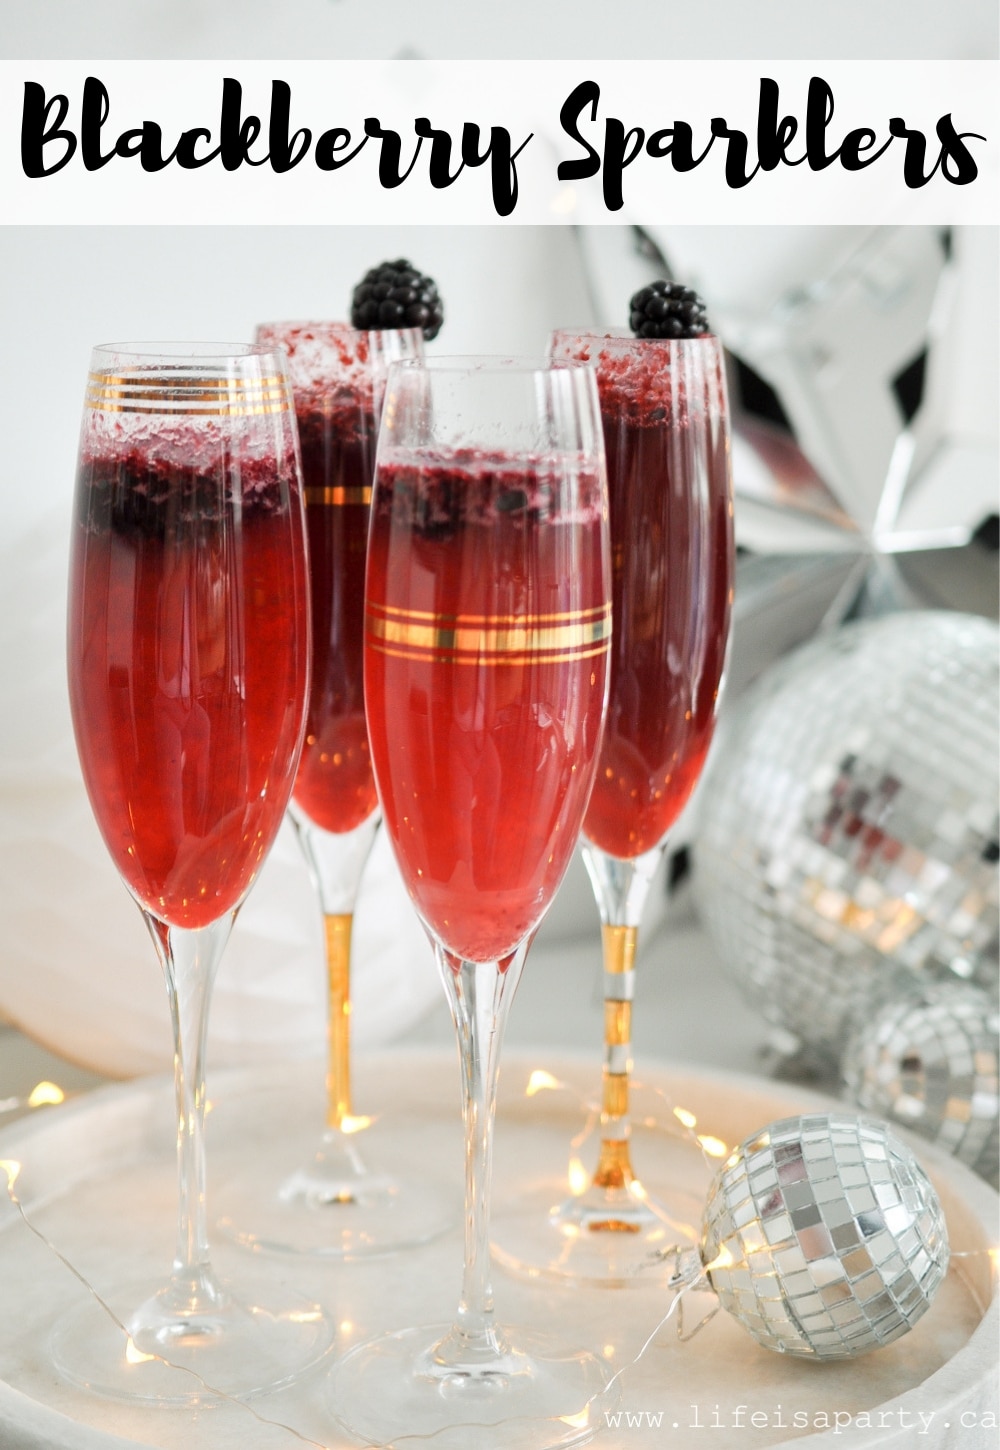 Blackberry Sparklers: fresh blackberries are pureed for this cocktail, make it with alcoholic, or without for a non alcoholic mocktail version.